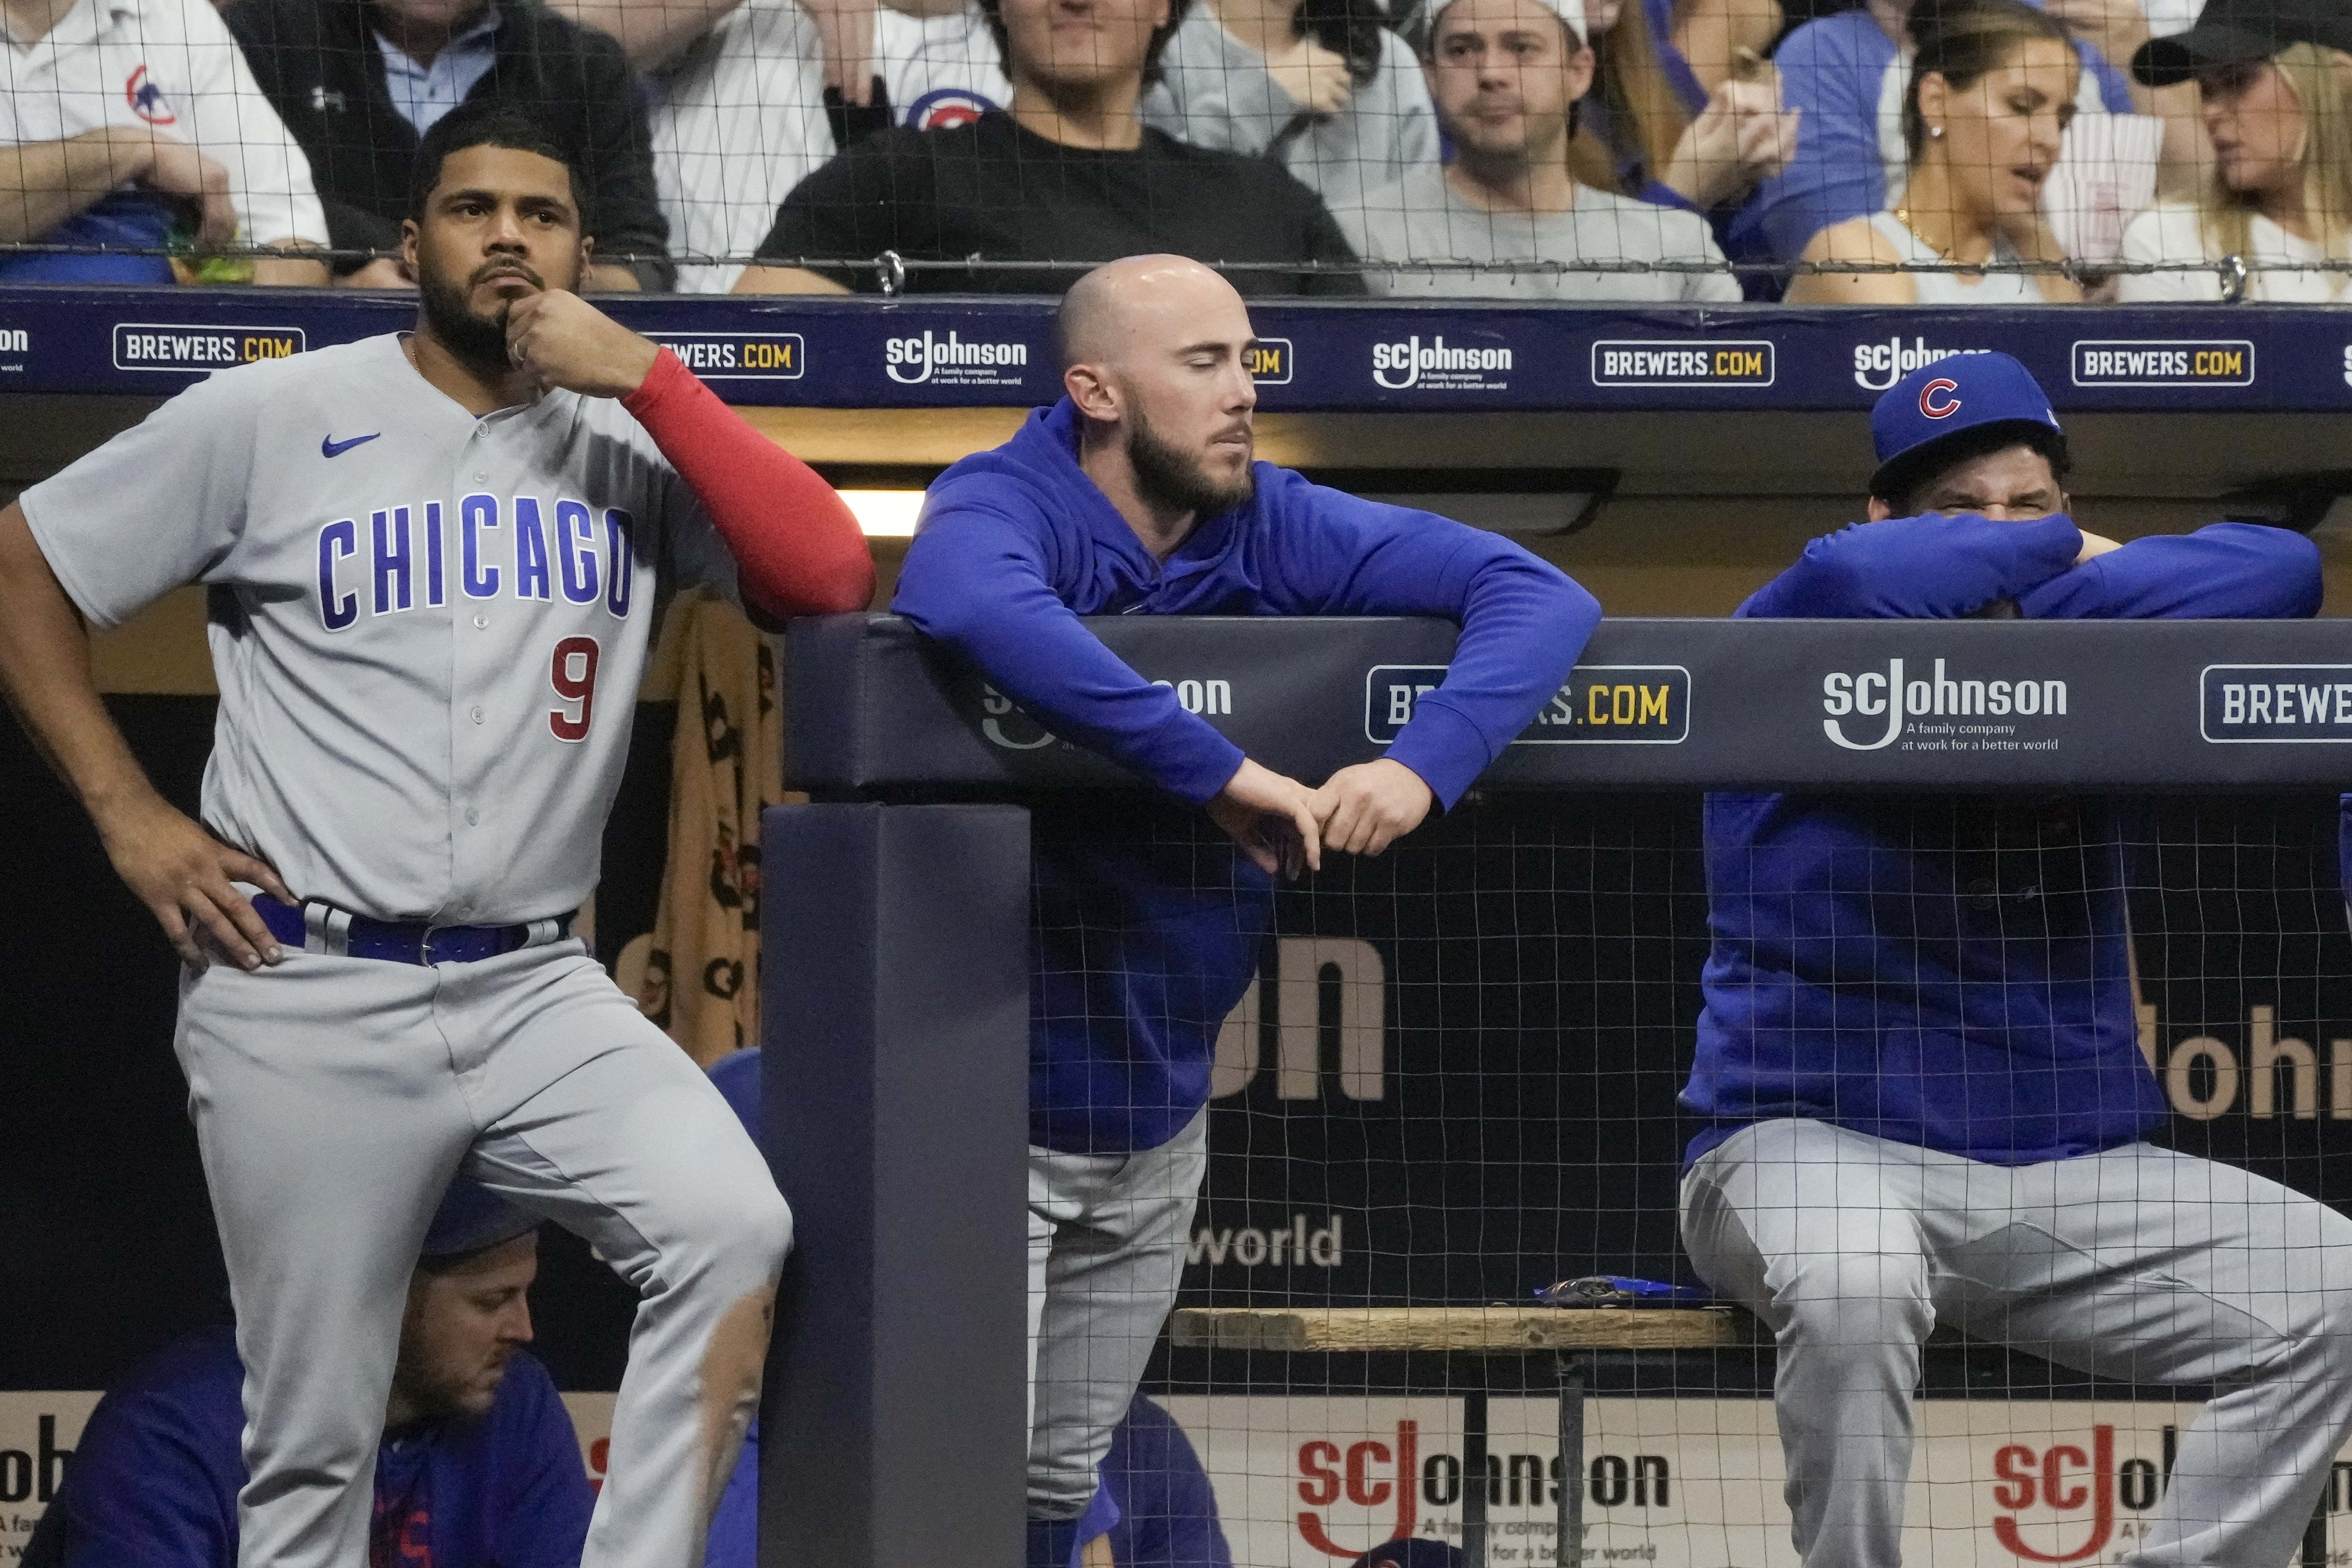 Paul Sullivan: All eyes are on manager David Ross in the Chicago Cubs'  stretch run, National Sports